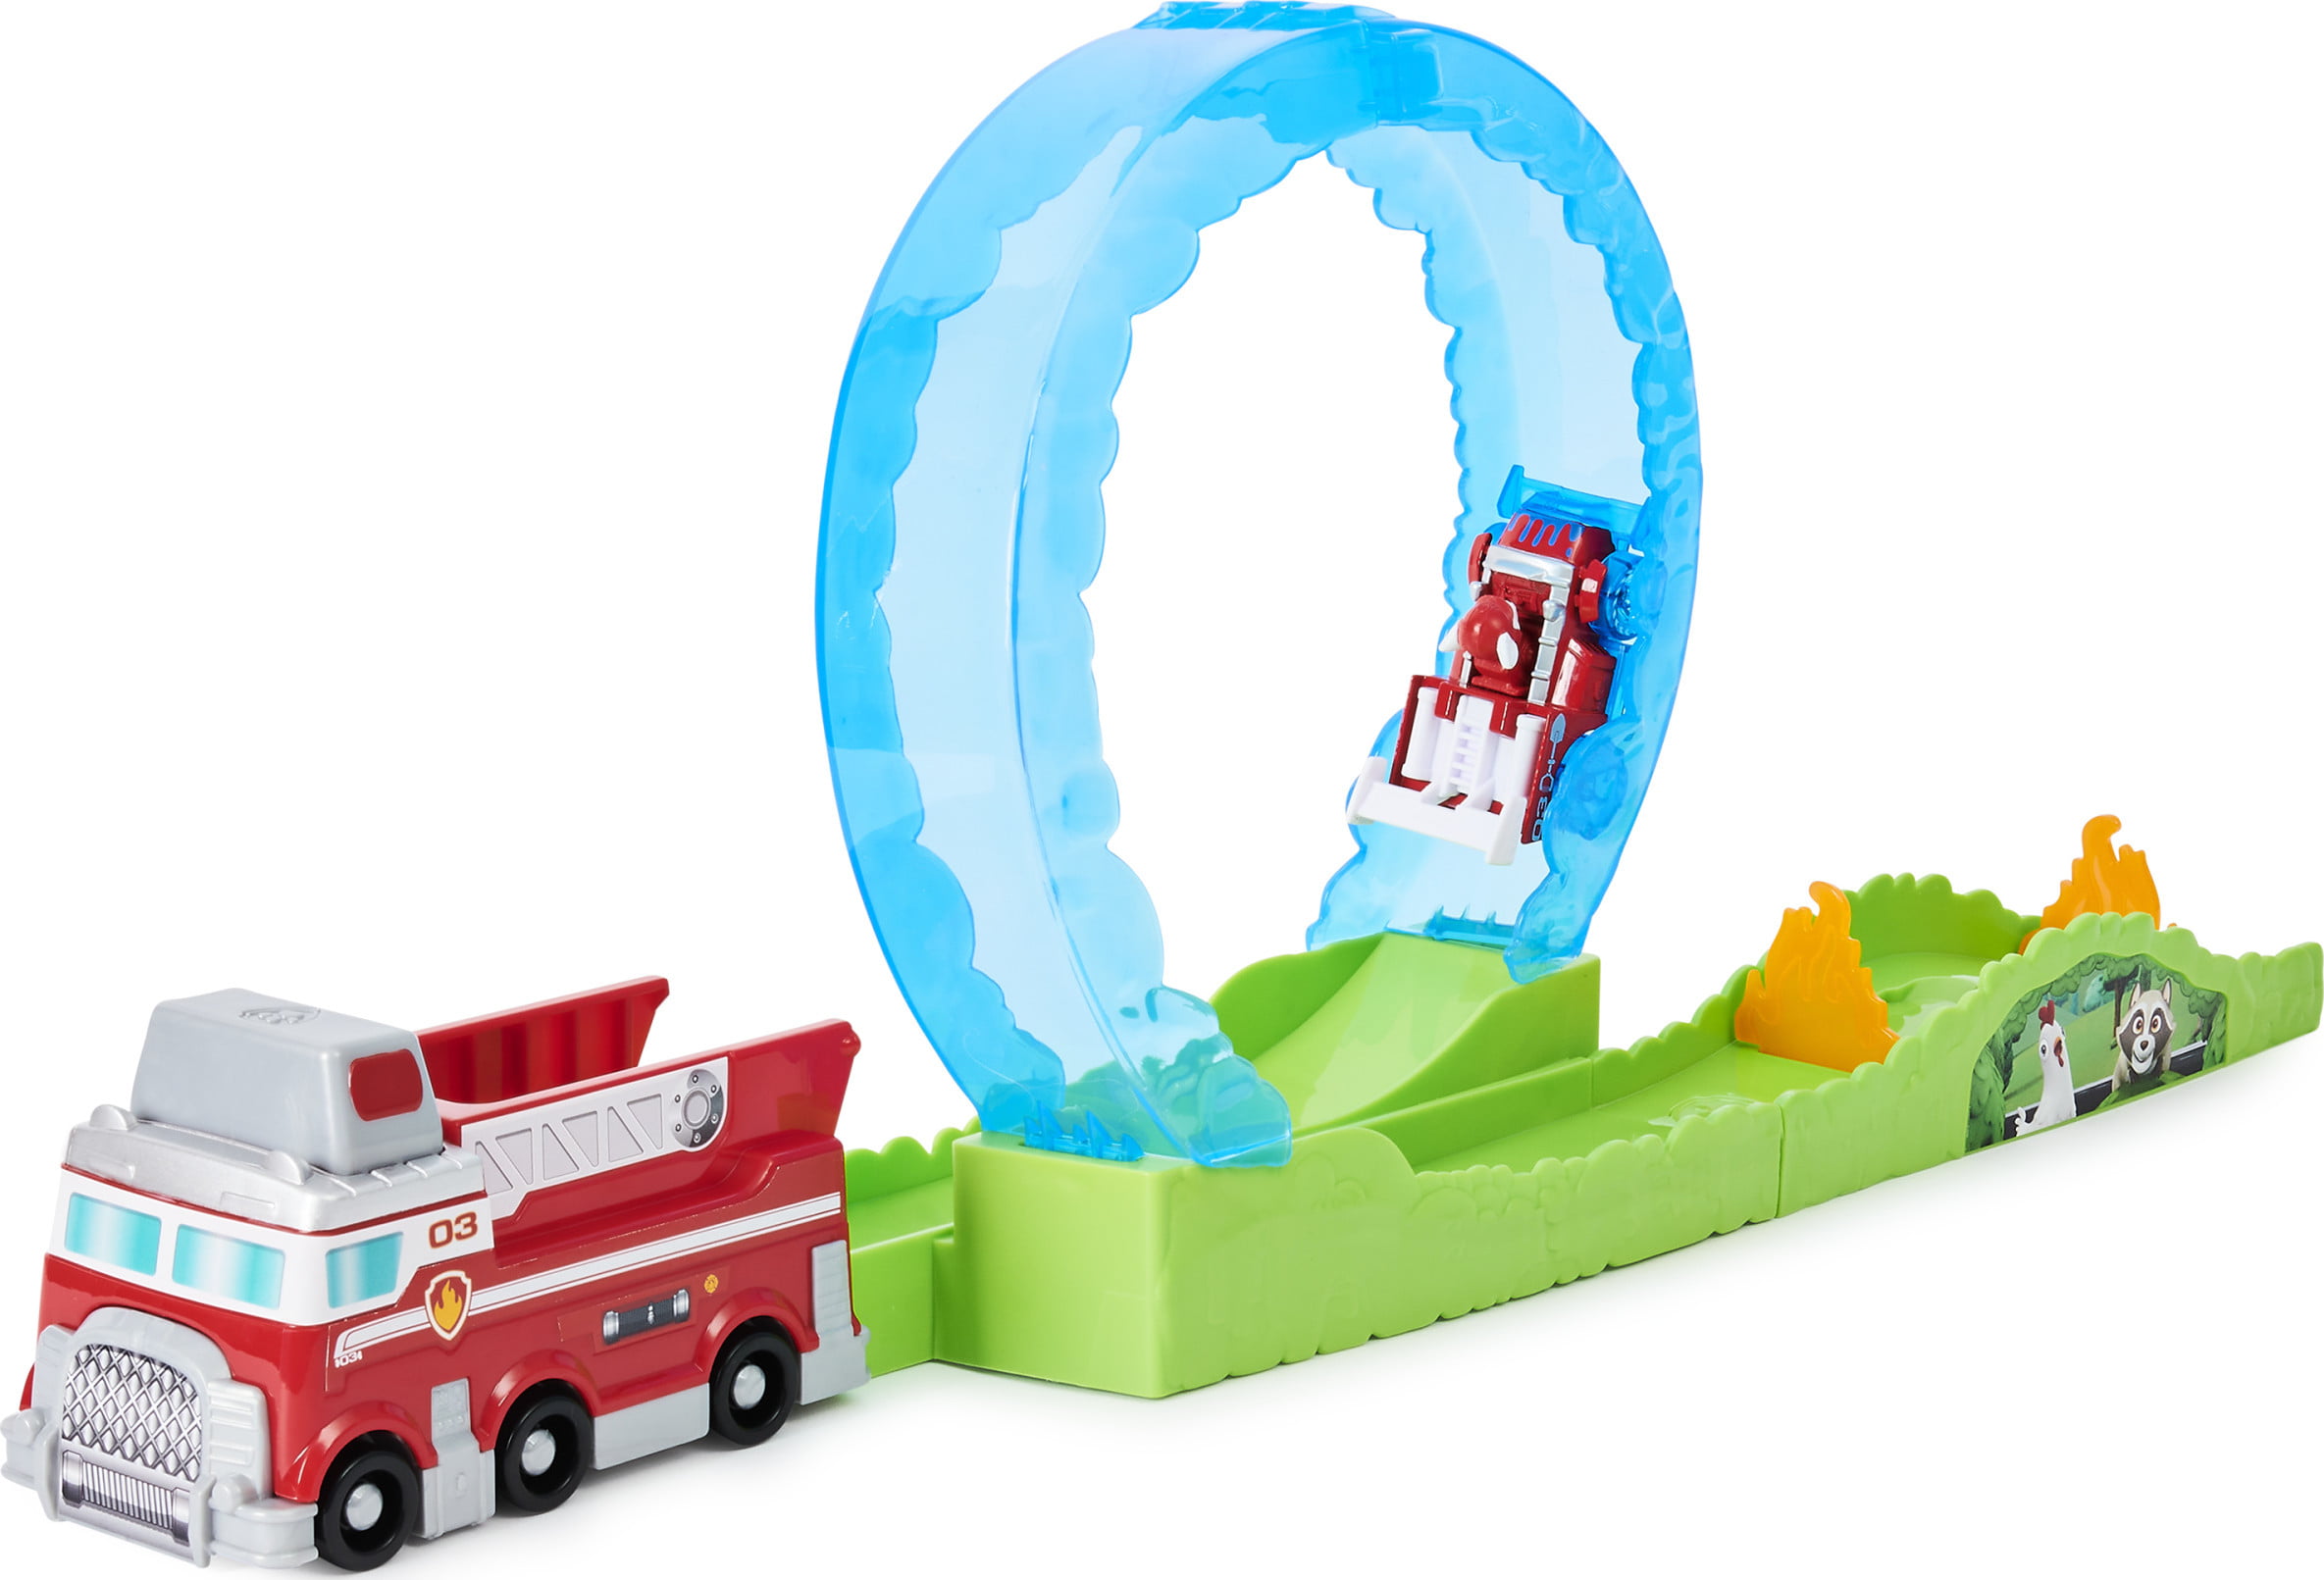 PAW Patrol, Metal Adventure Bay Rescue Playset with 2 Exclusive Vehicles, 1:55 Scale - Walmart.com